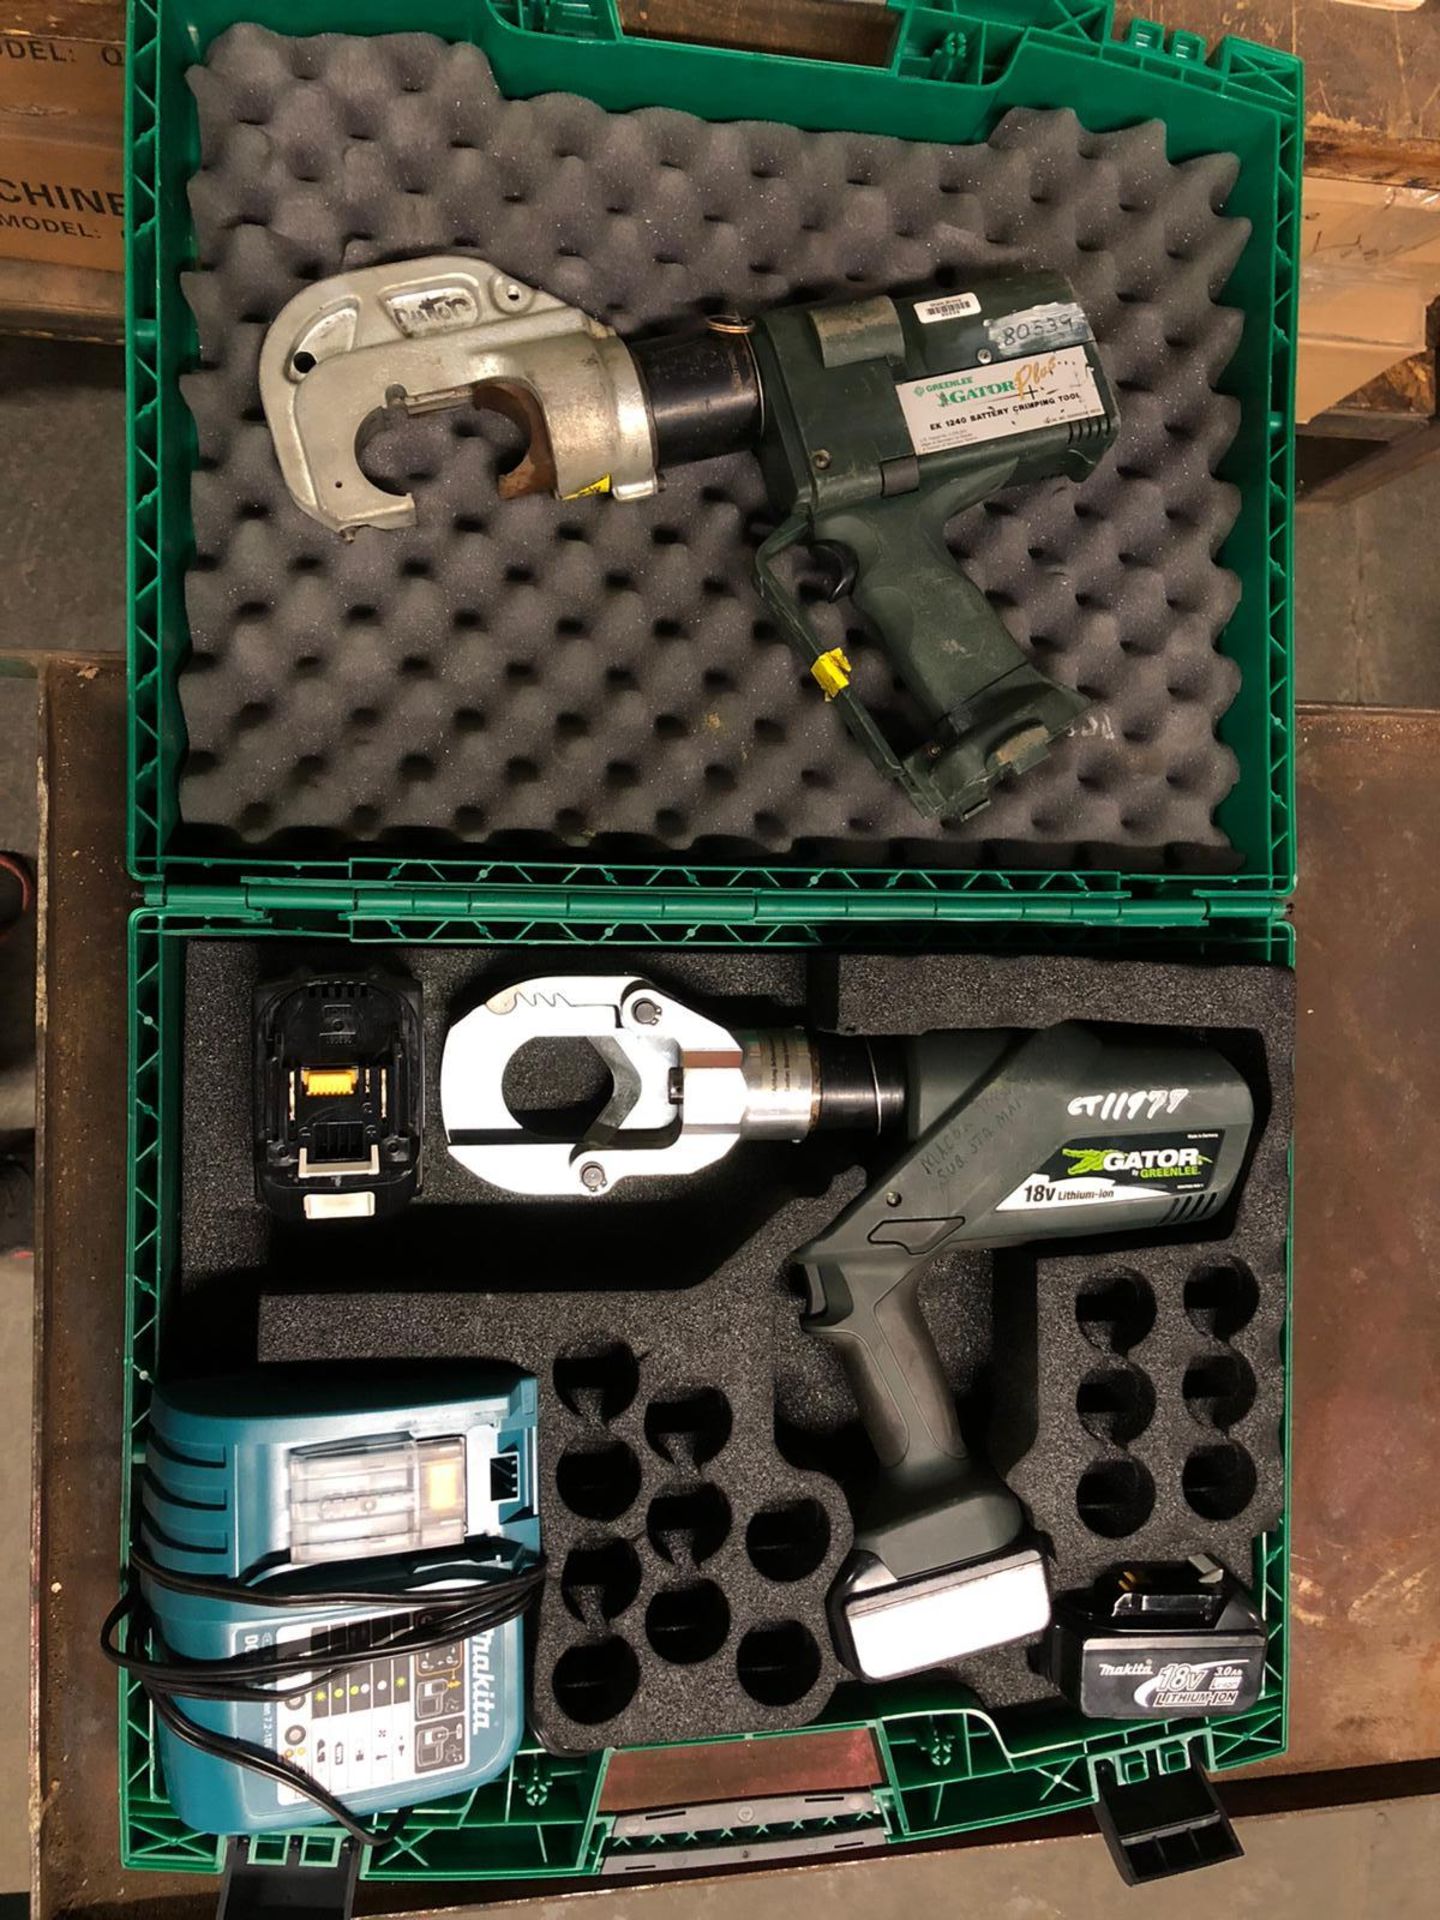 Lot of 2 (2 units) Greenlee Gator 18V Battery Powered Hand Crimping Tools in cases with charges - Image 2 of 3